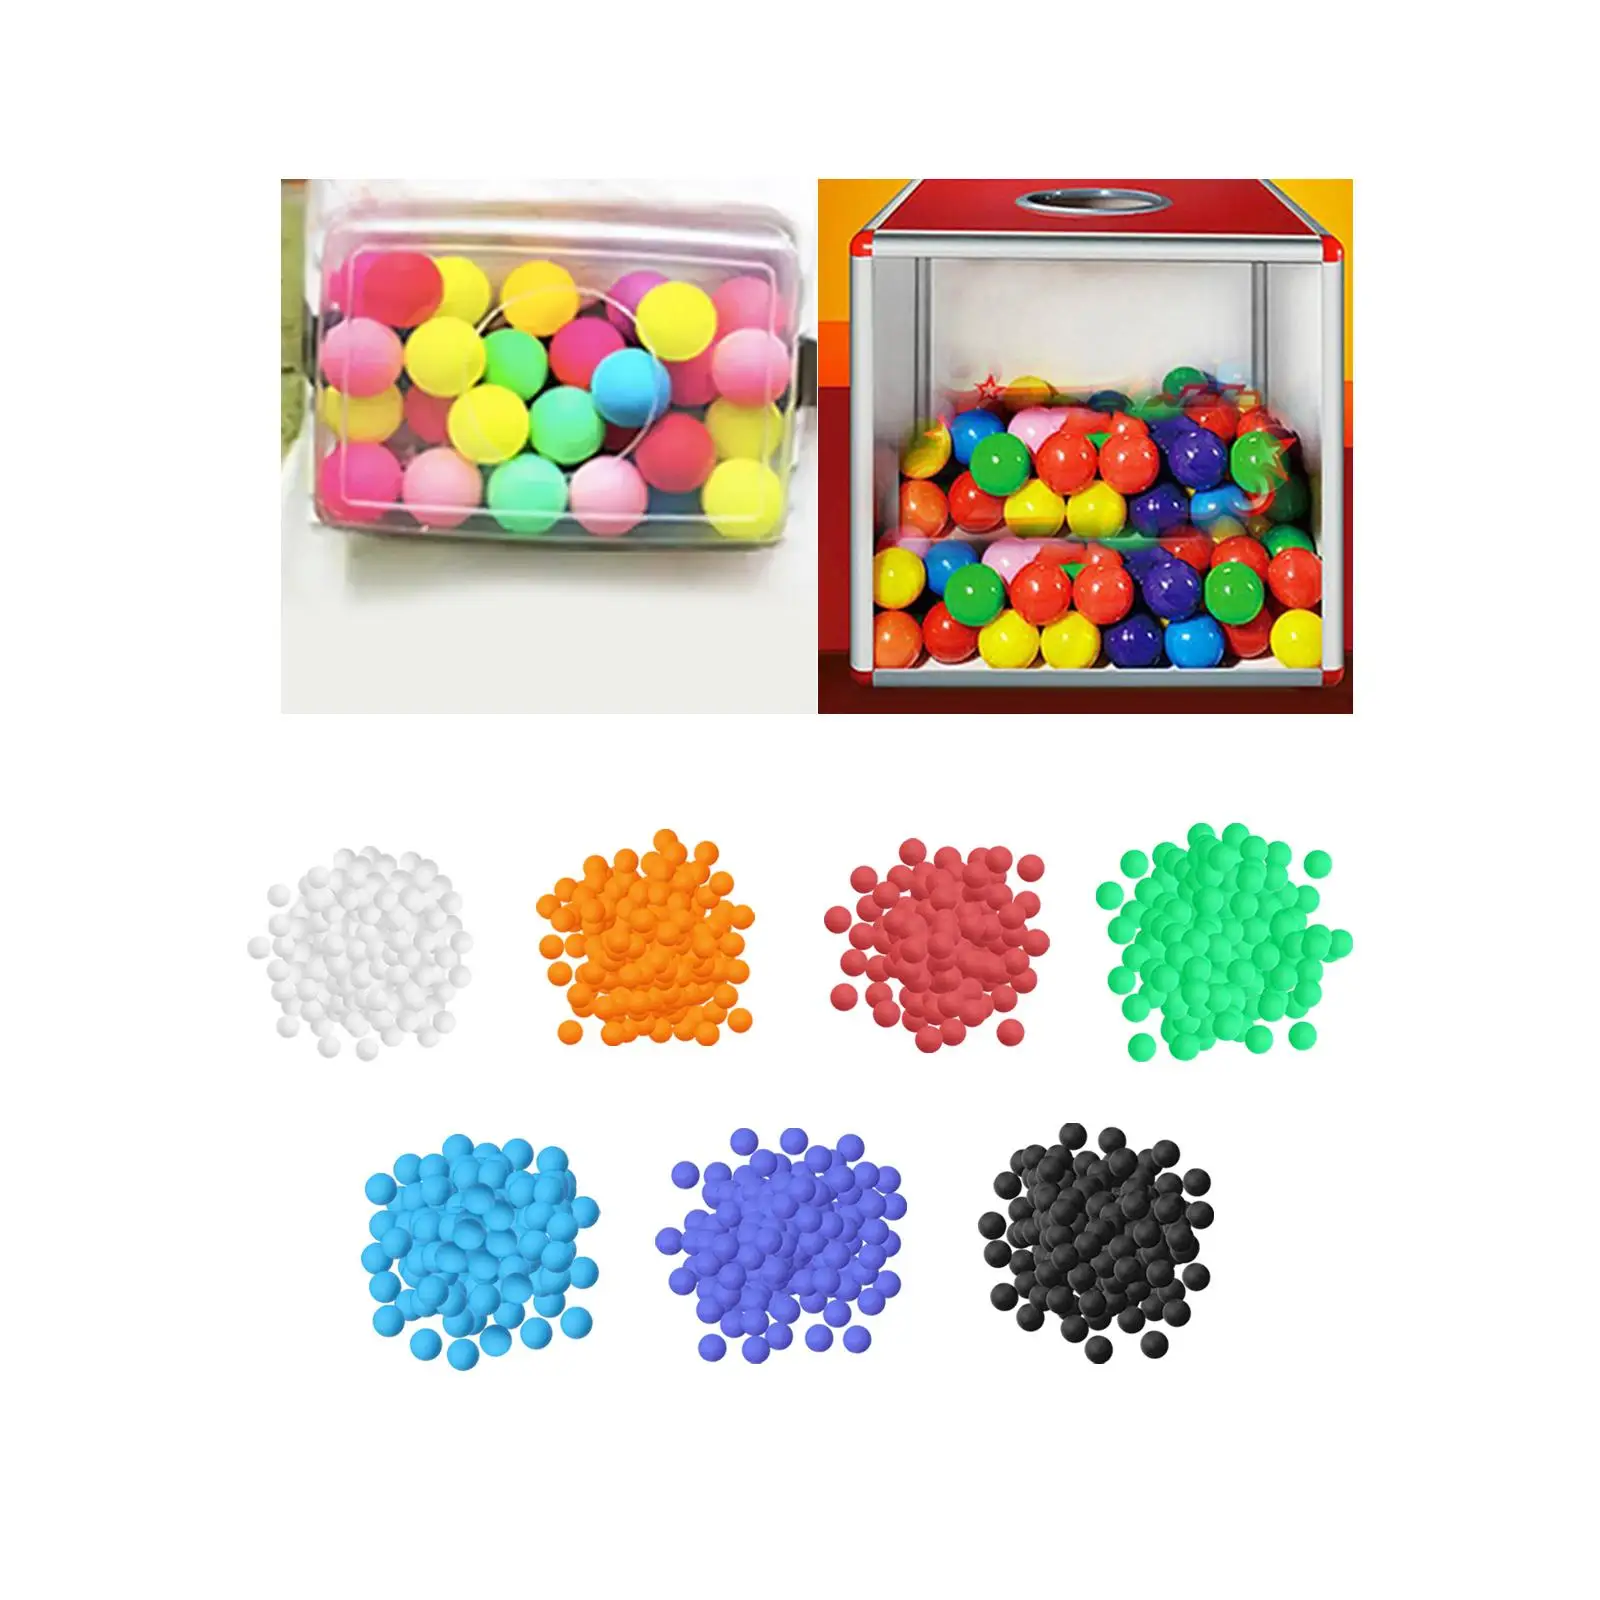 150x Ping Pong Balls 40mm Entertainment Table Tennis Balls for Kids Halloween Family Games School Games Recreational Play